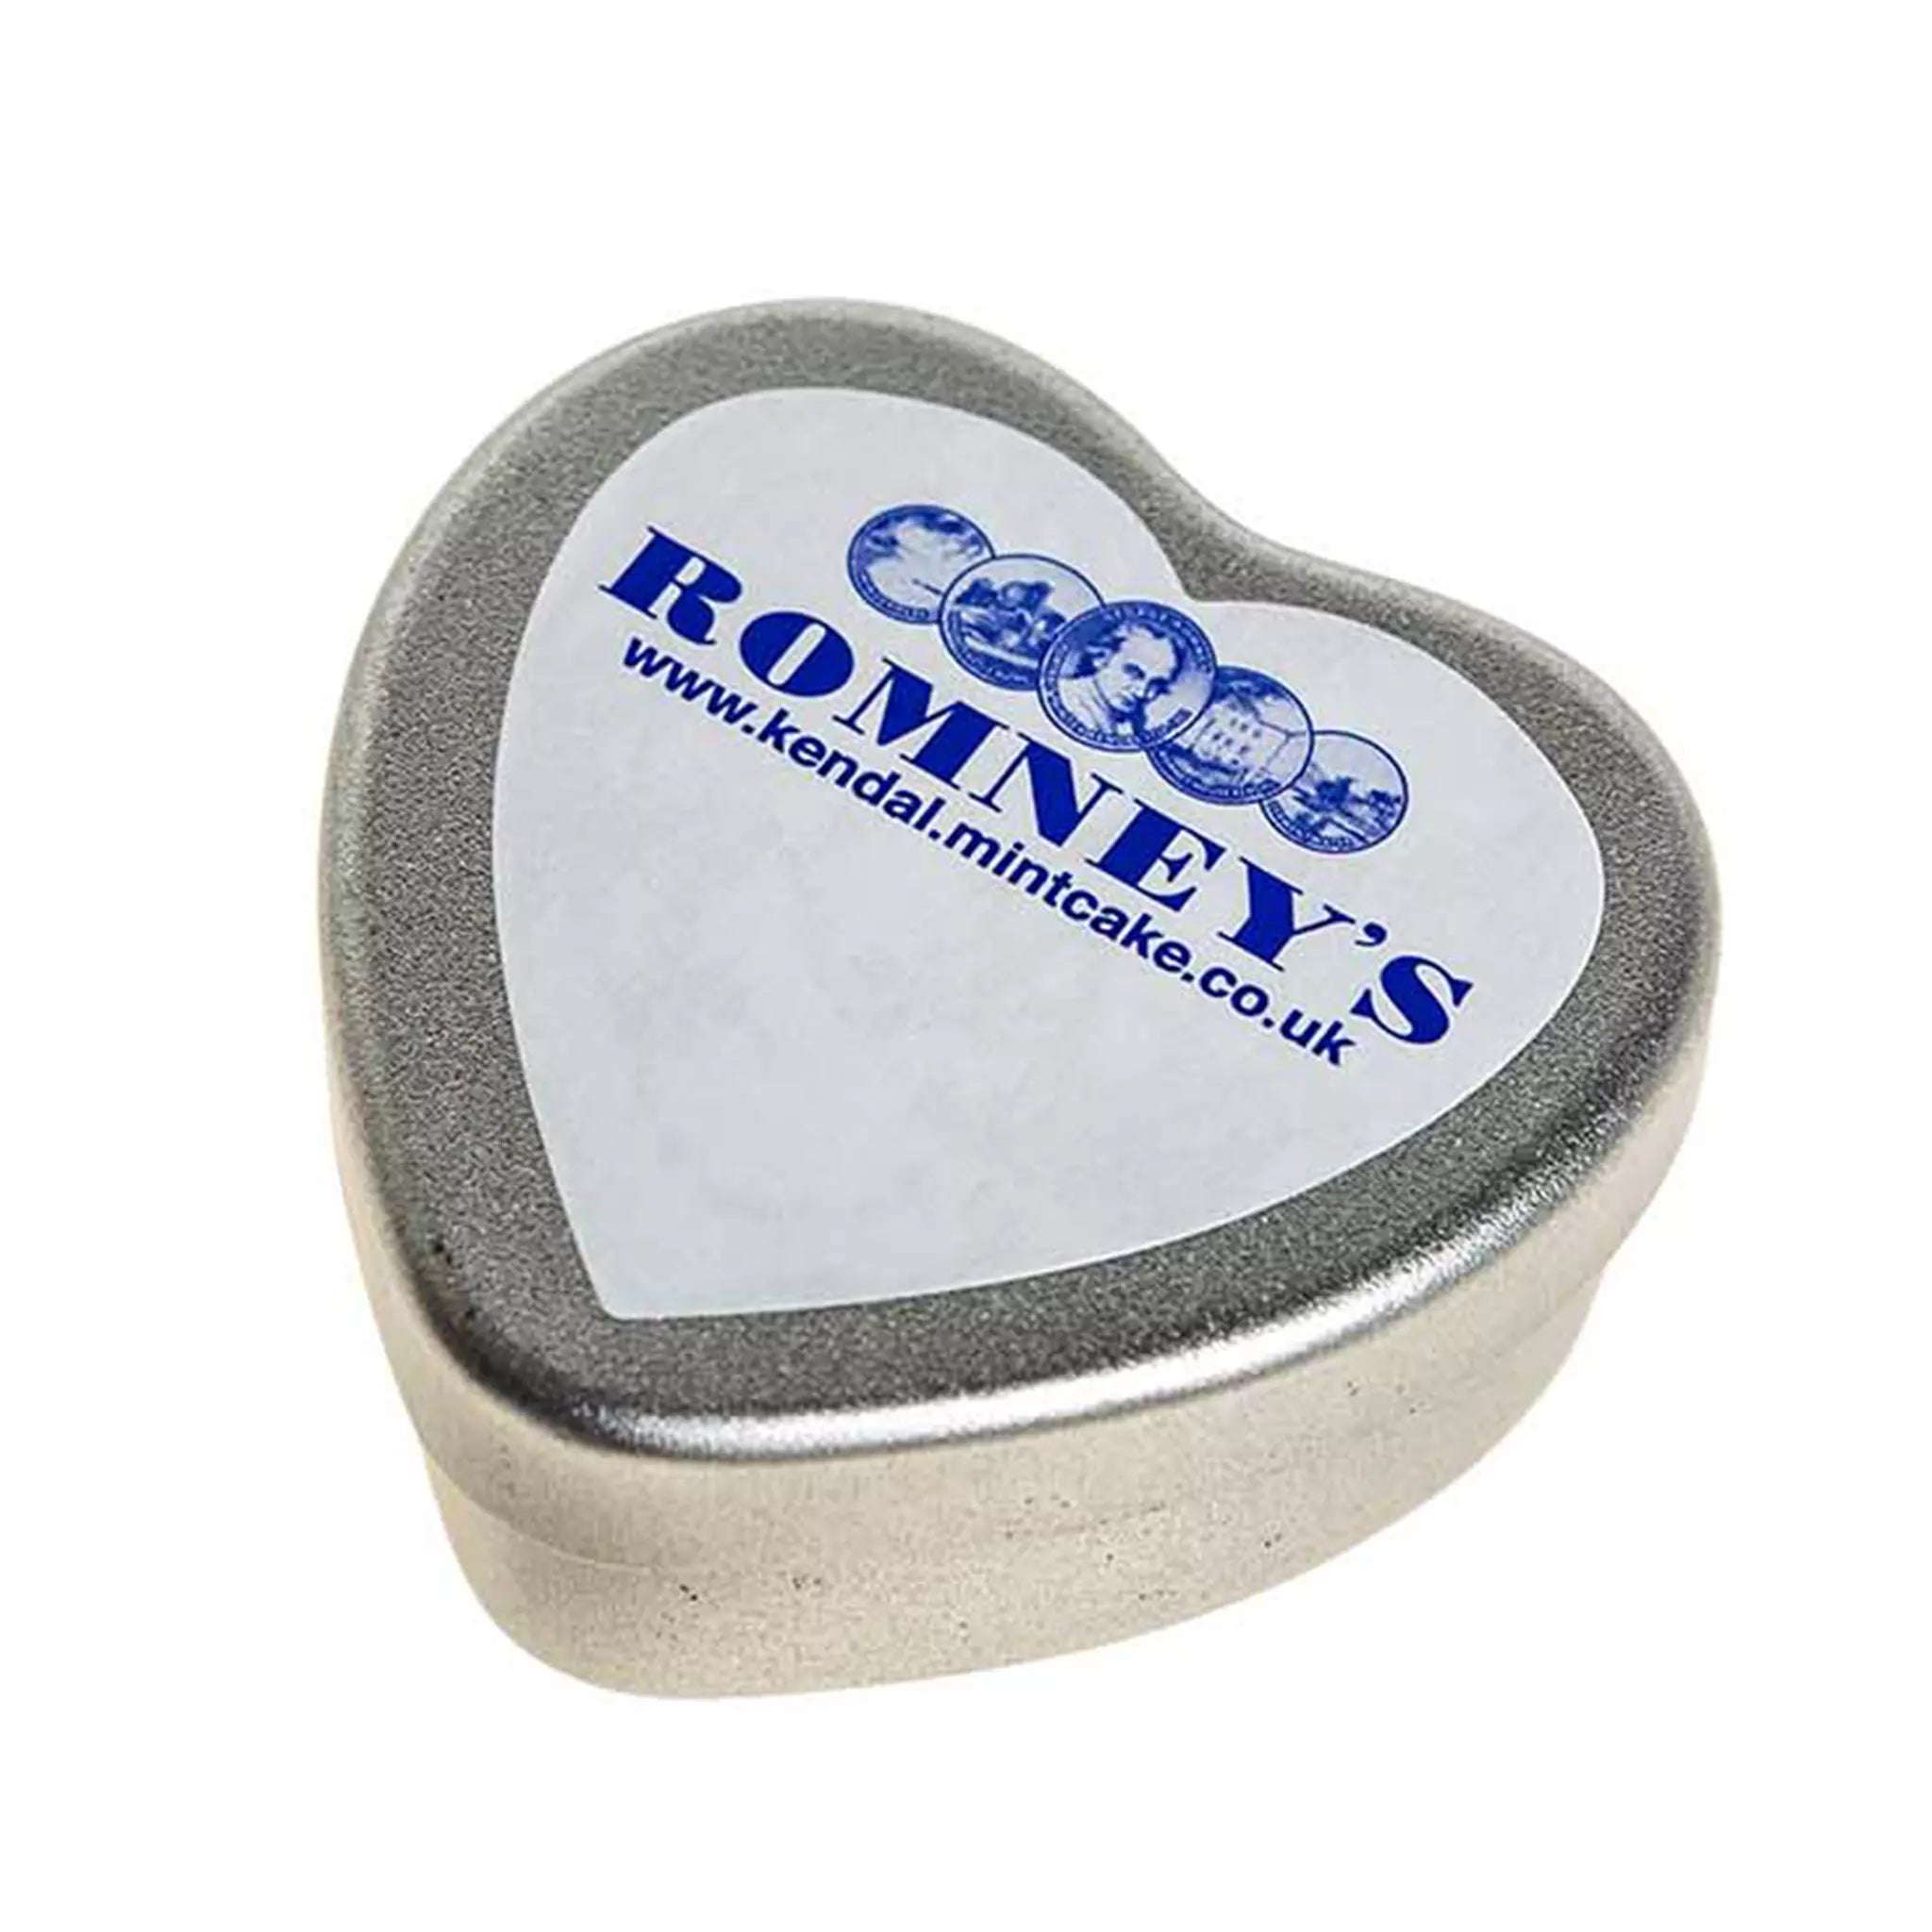 A heart shaped tin contains a heart shaped chocolate coated Kendal Mint Cake. The lid has a white heart shaped sticker on it featuring the text 'Romney's'. the website URL & Romney's logos in a blue font.